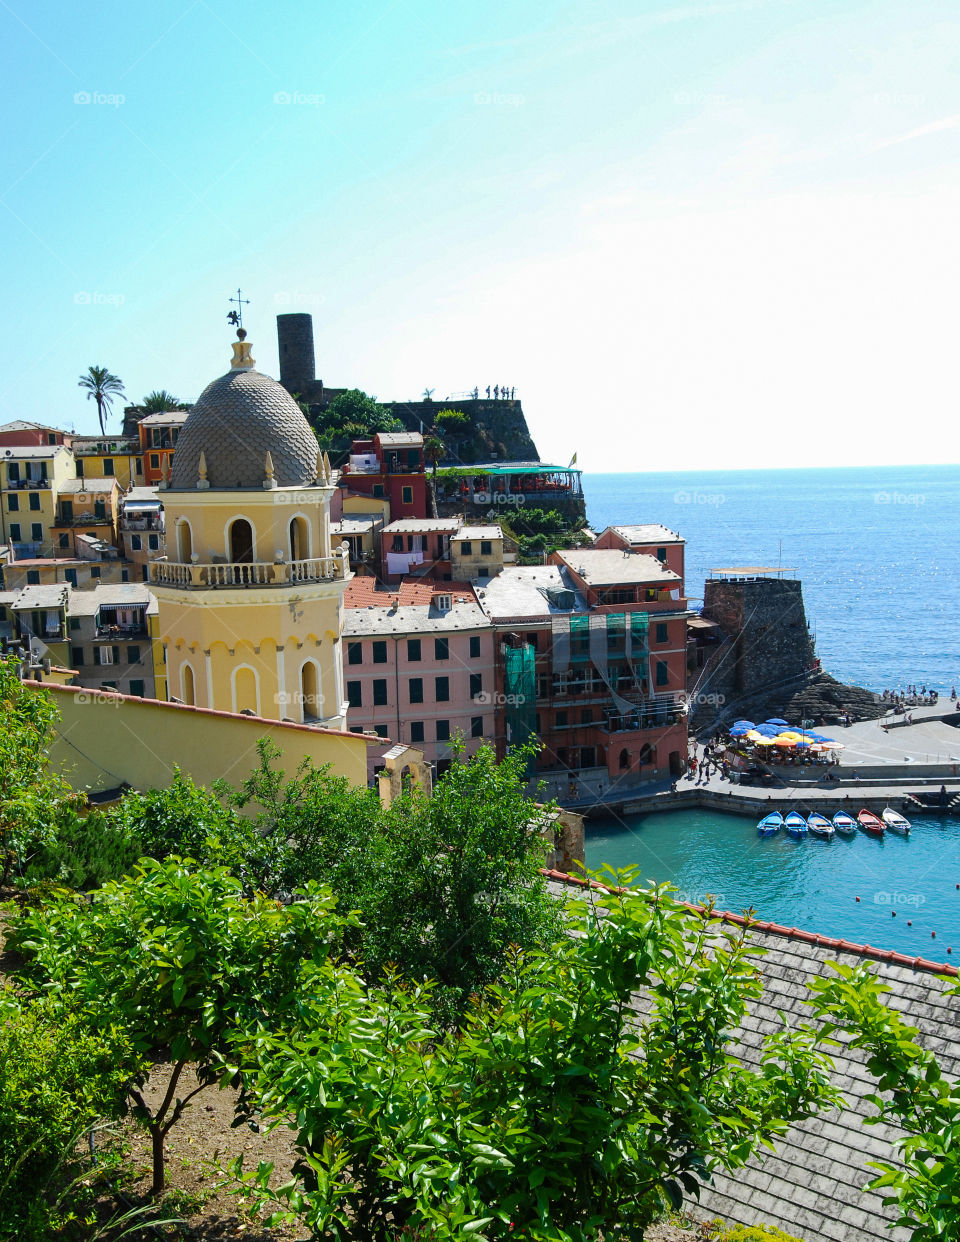 Vernazza View. The town of Vernazza in the Cinque Terre region of Italy